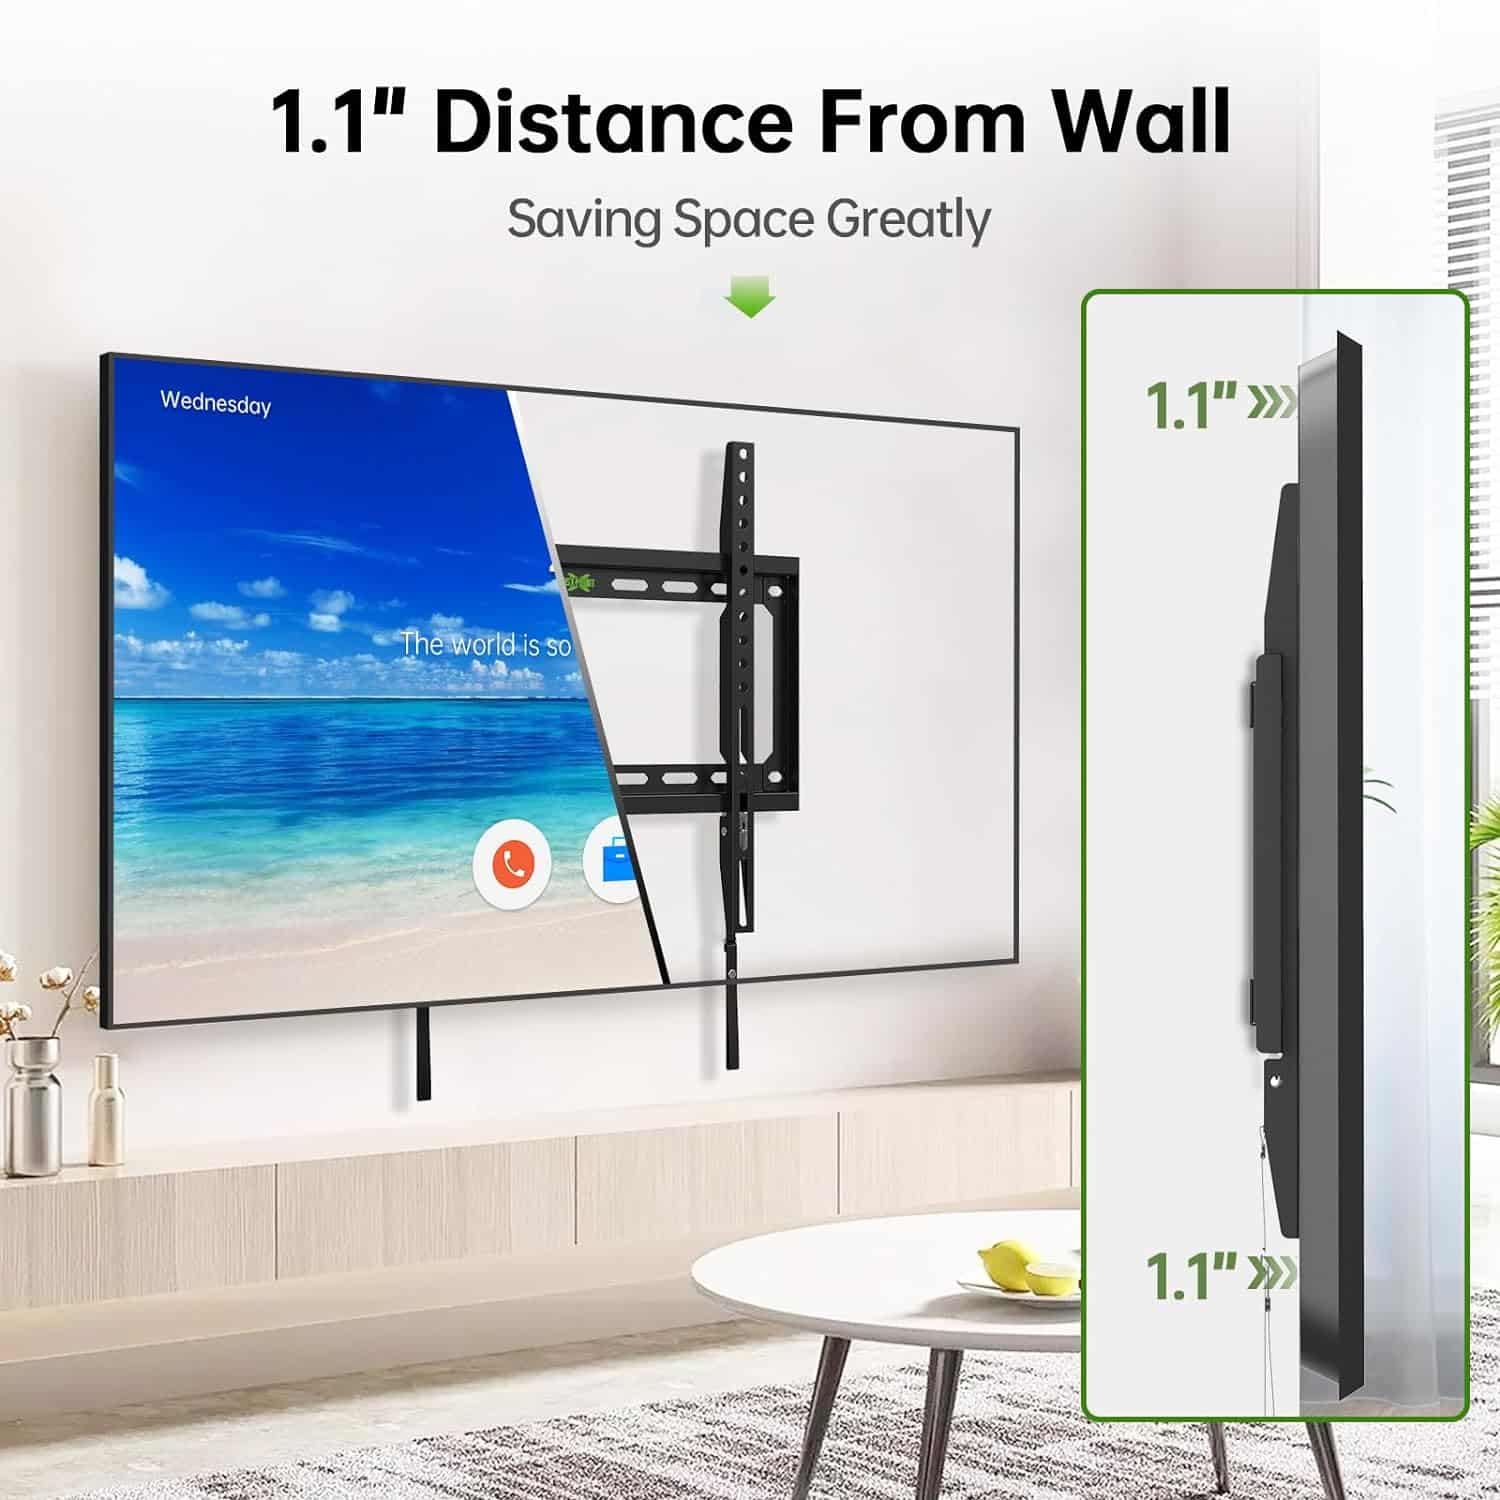 USX MOUNT Fixed TV Wall Mount: The Perfect Solution for Your Home Entertainment Setup